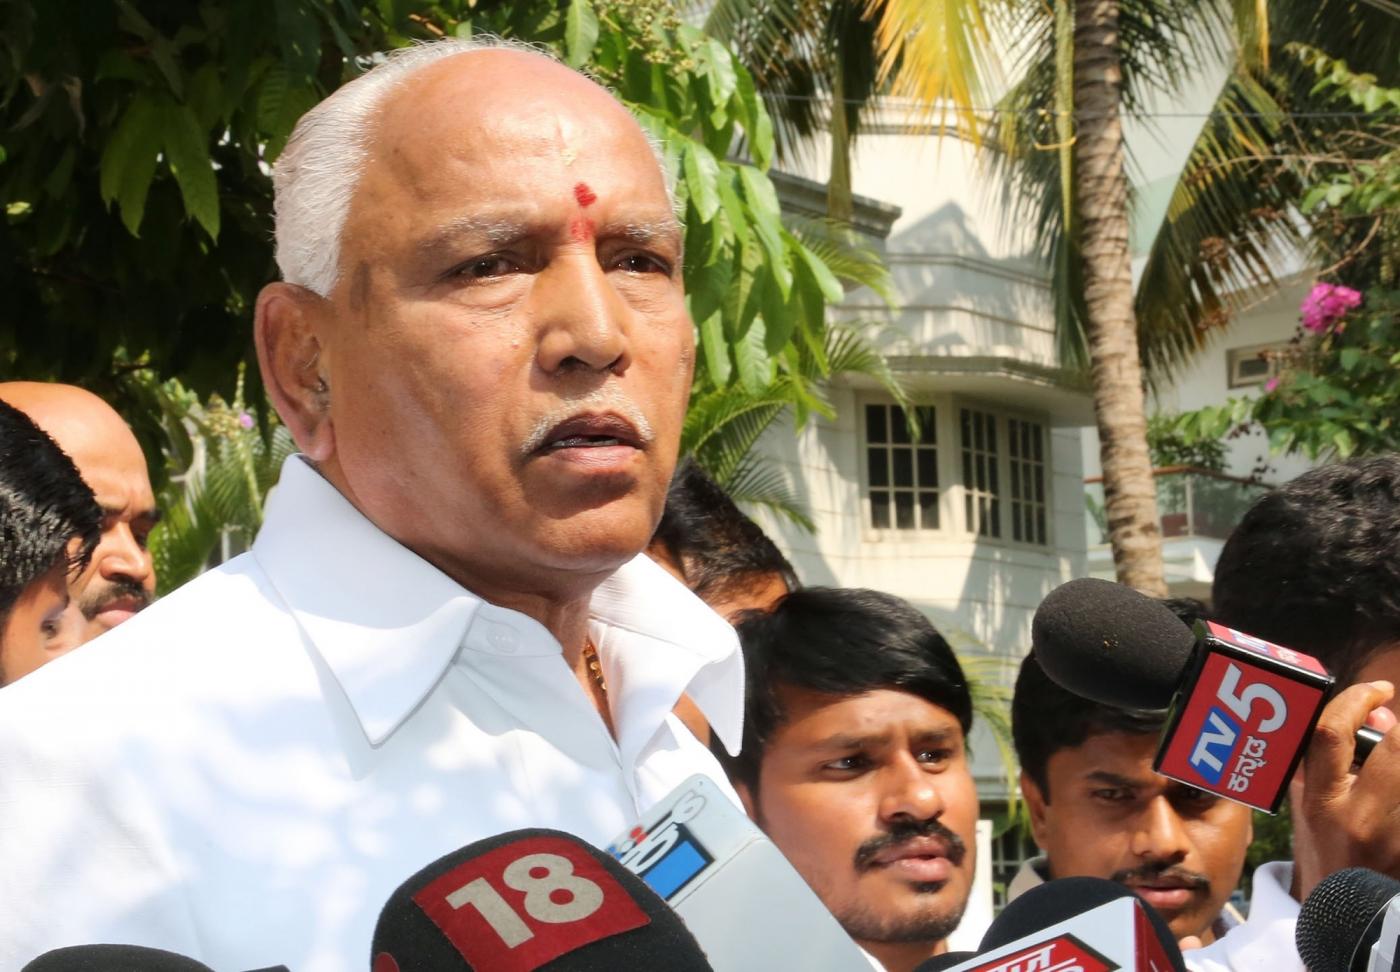 Bengaluru: BJP's Chief Ministerial candidate B.S. Yeddyurappa talks to the press after he was elected to the Karnataka Assembly from Shikaripura by 35,397 votes; in Bengaluru on May 15, 2018. Yeddyurappa, 75, defeated Congress nominee Goni Malatesha and seven others in his home constituency. (Photo: IANS) by .